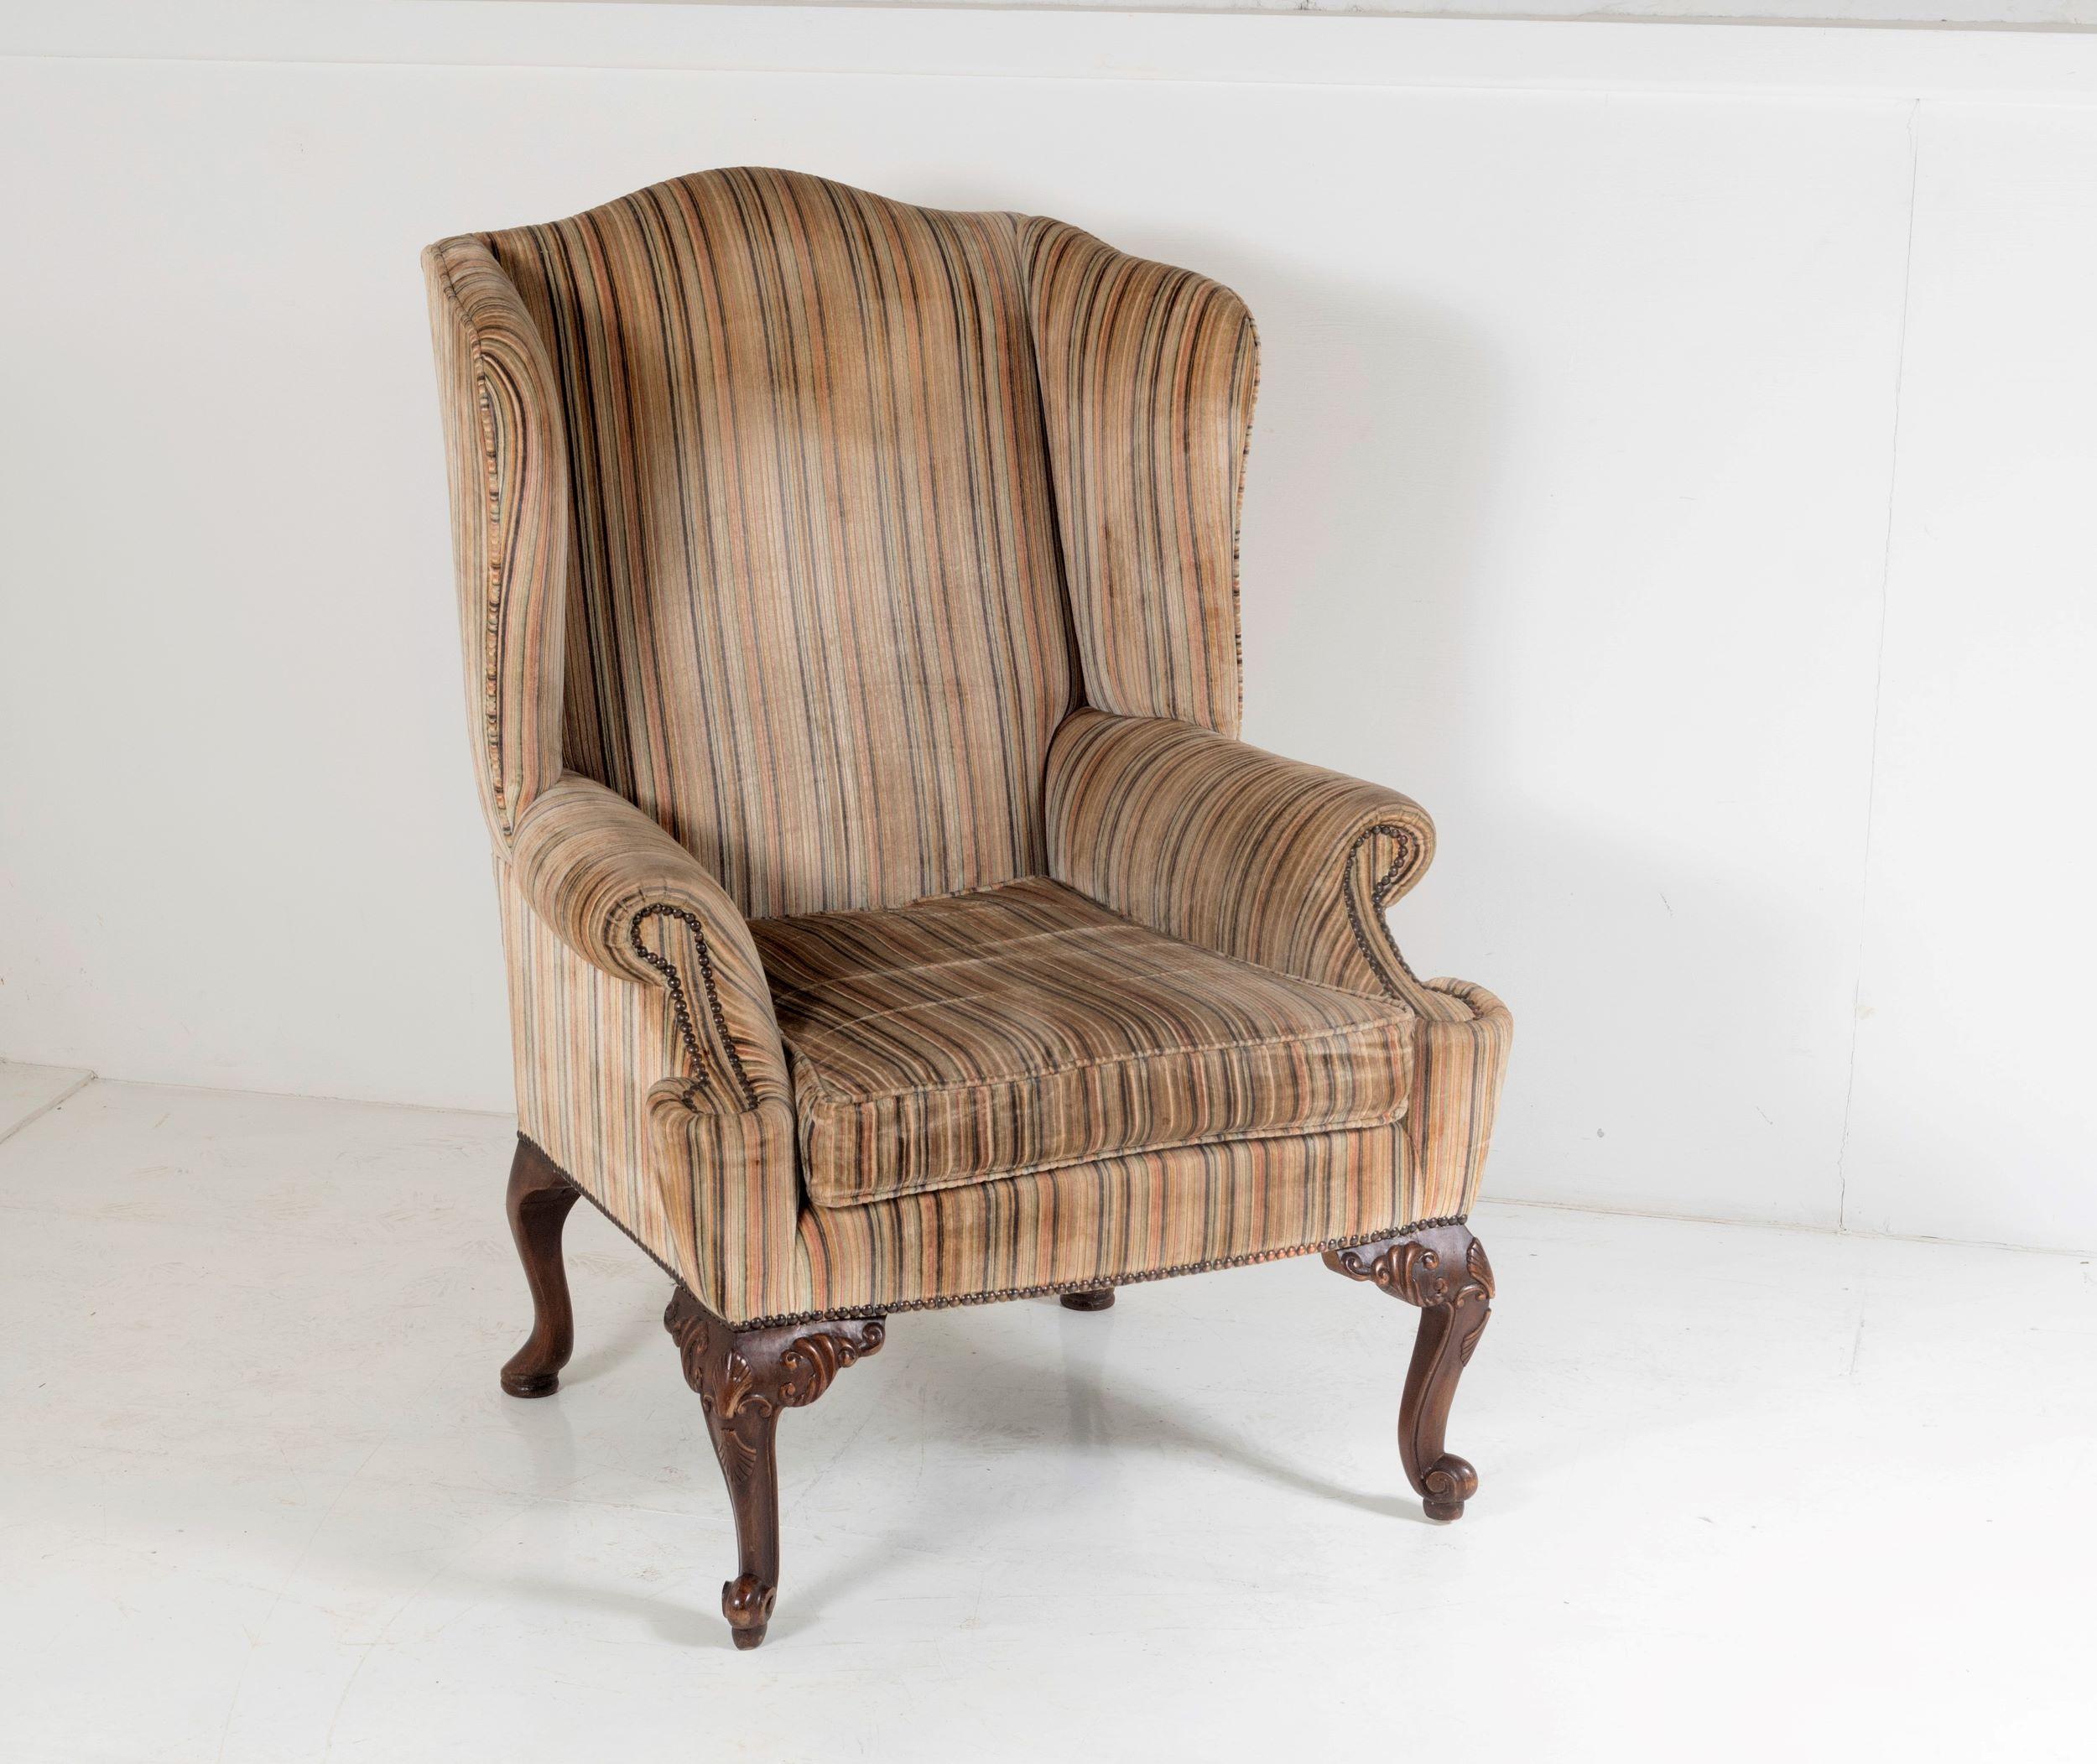 A good quality George III style wing back armchair with original striped upholstery on short cabriole legs and pad feet.
The upholstery is in good order, some fading but overall in very good condition with nice pile, a stylish striped upholstery